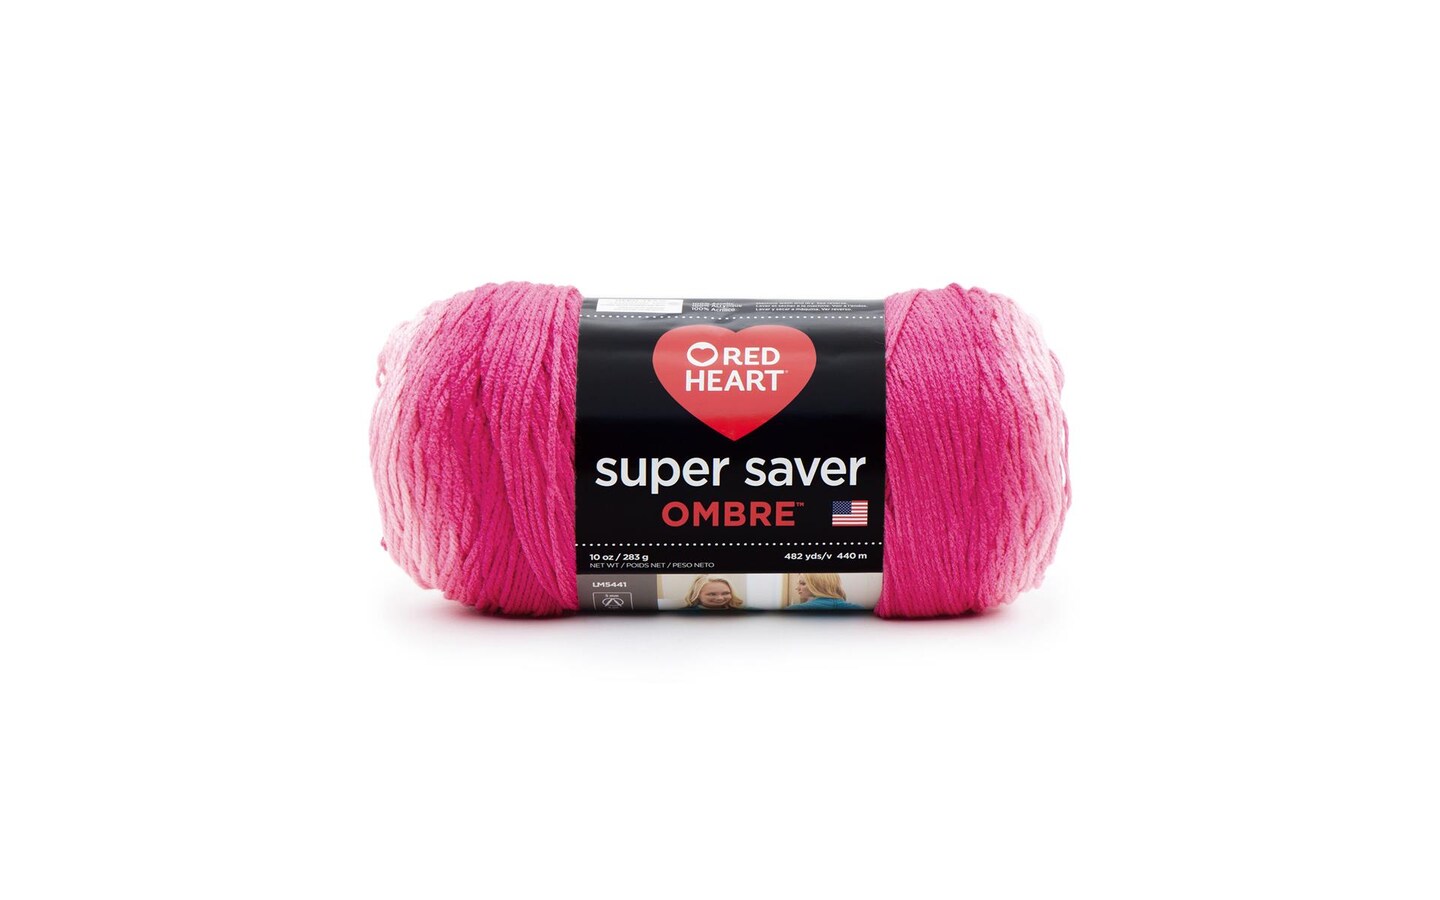 C&C Red Heart Super Saver Yarn 10oz Ombre GrnApple 